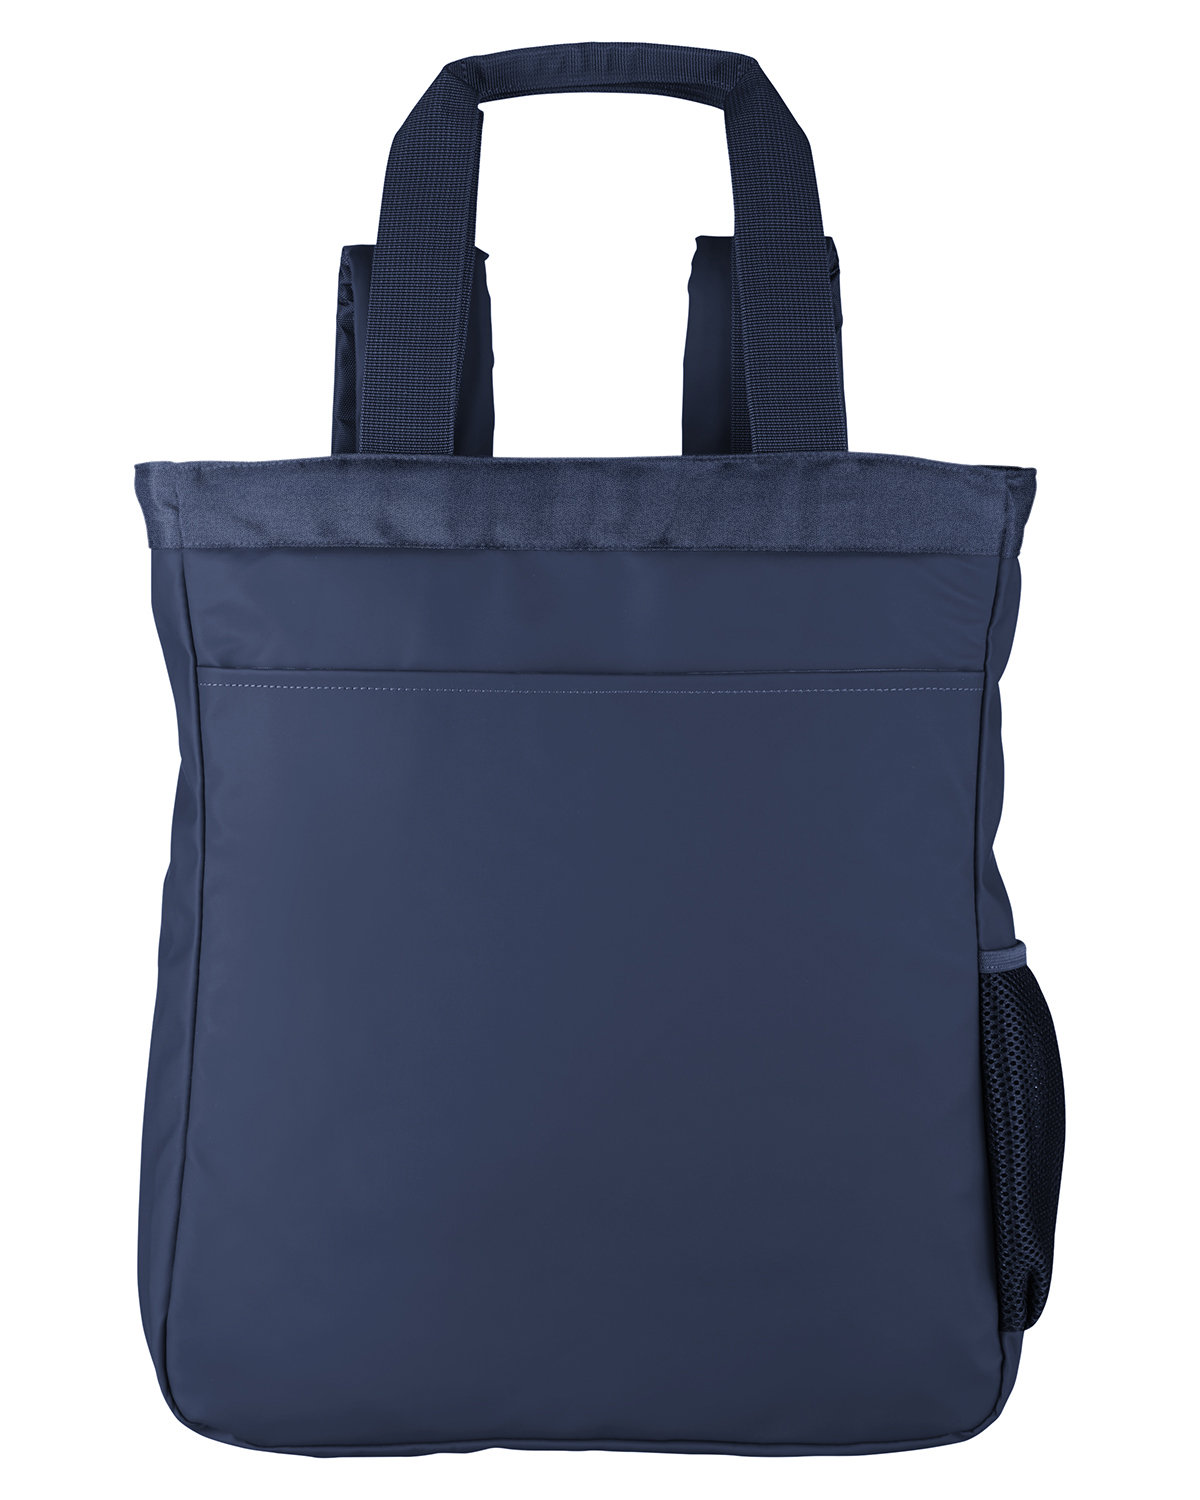 North End Men's Reflective Convertible Backpack Tote CLASSIC NAVY 